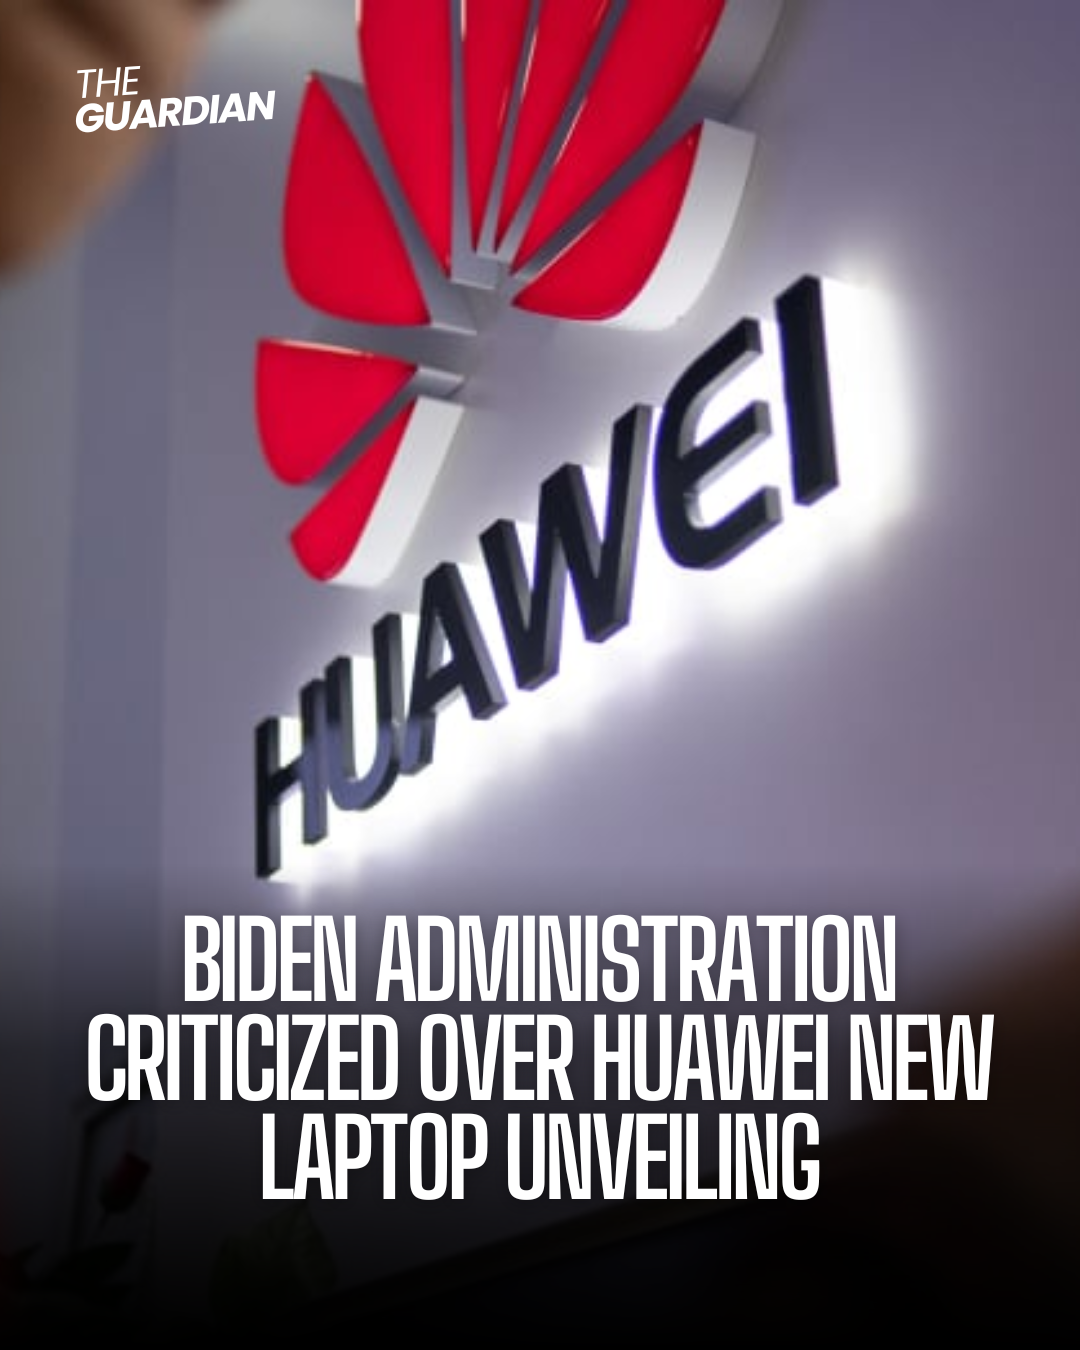 Following Huawei announcement of a new laptop, Republican senators have expressed significant opposition.